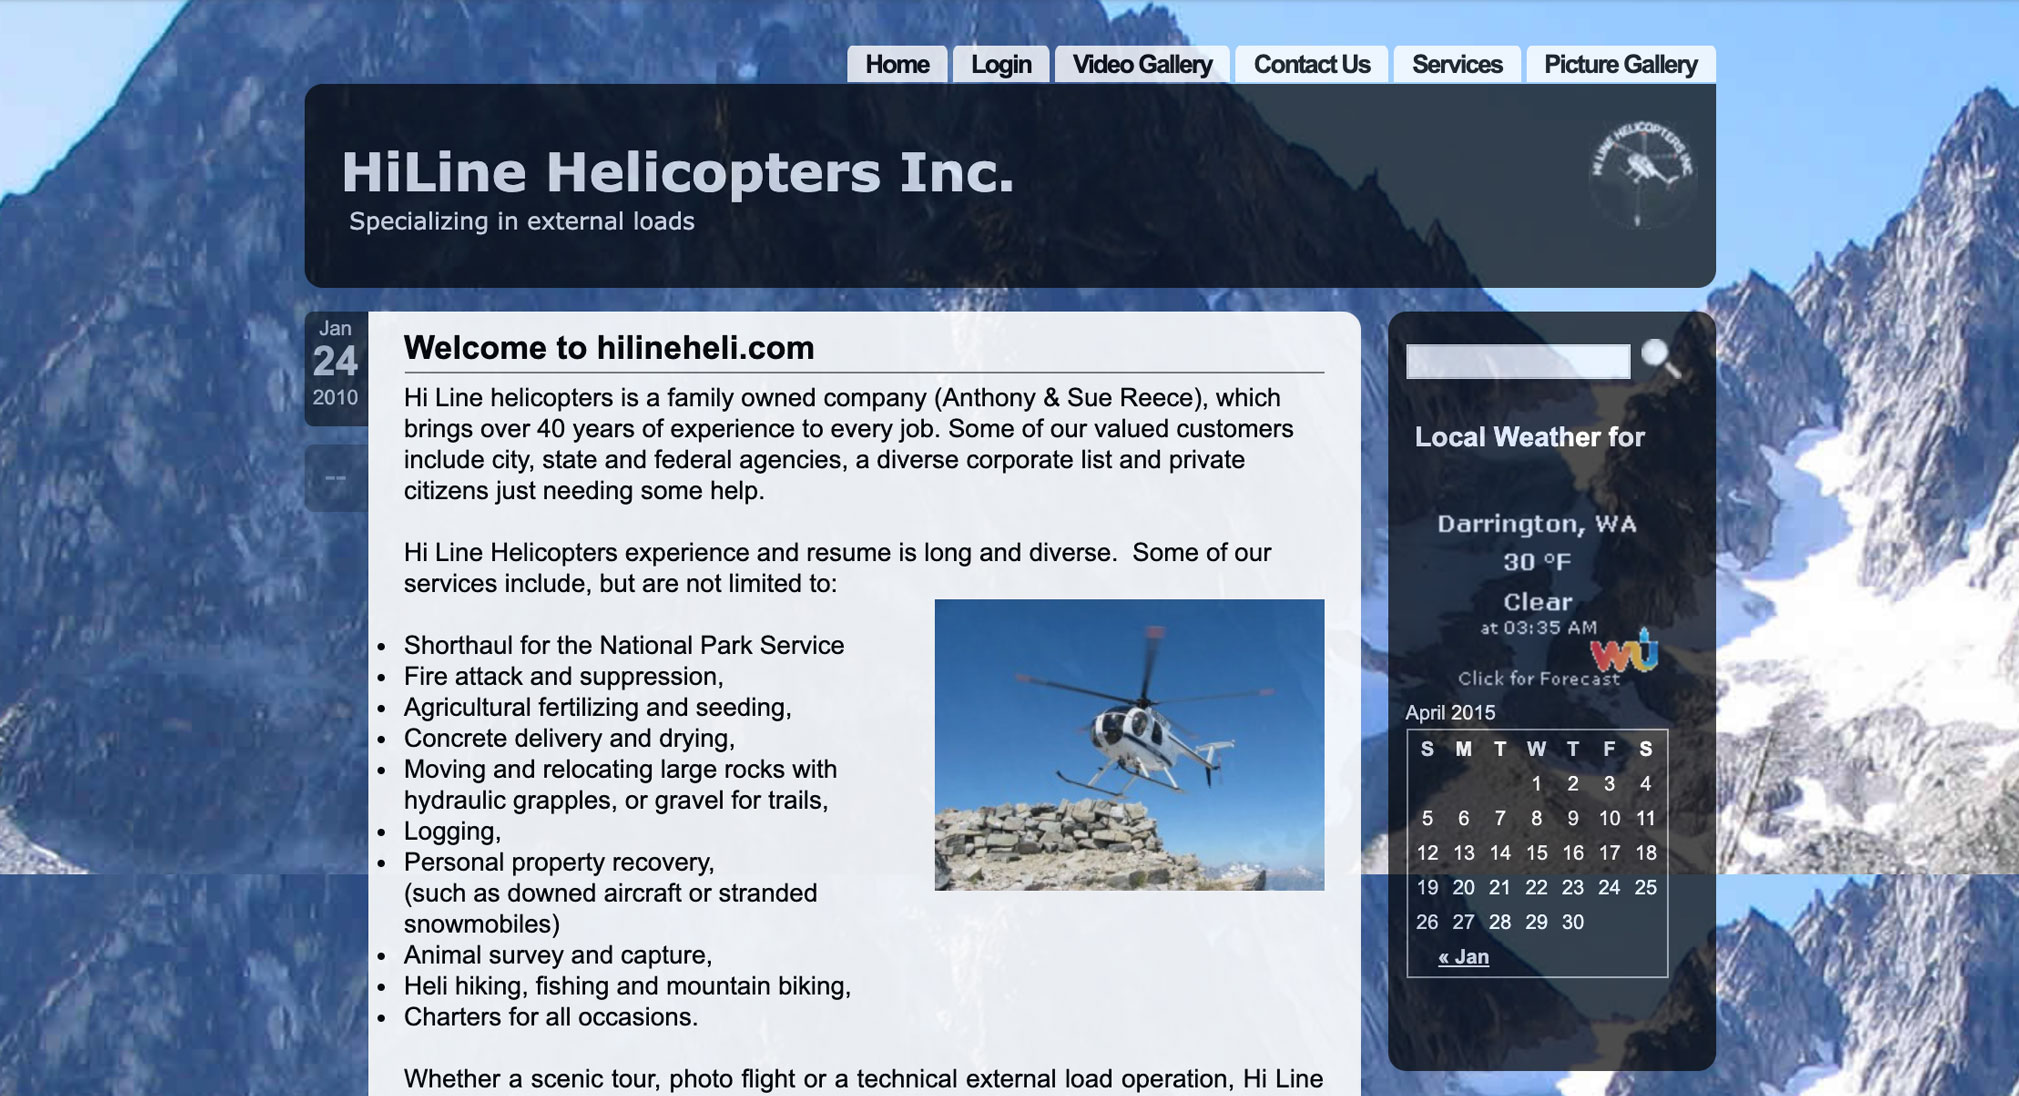 Hi-Line Helicopters